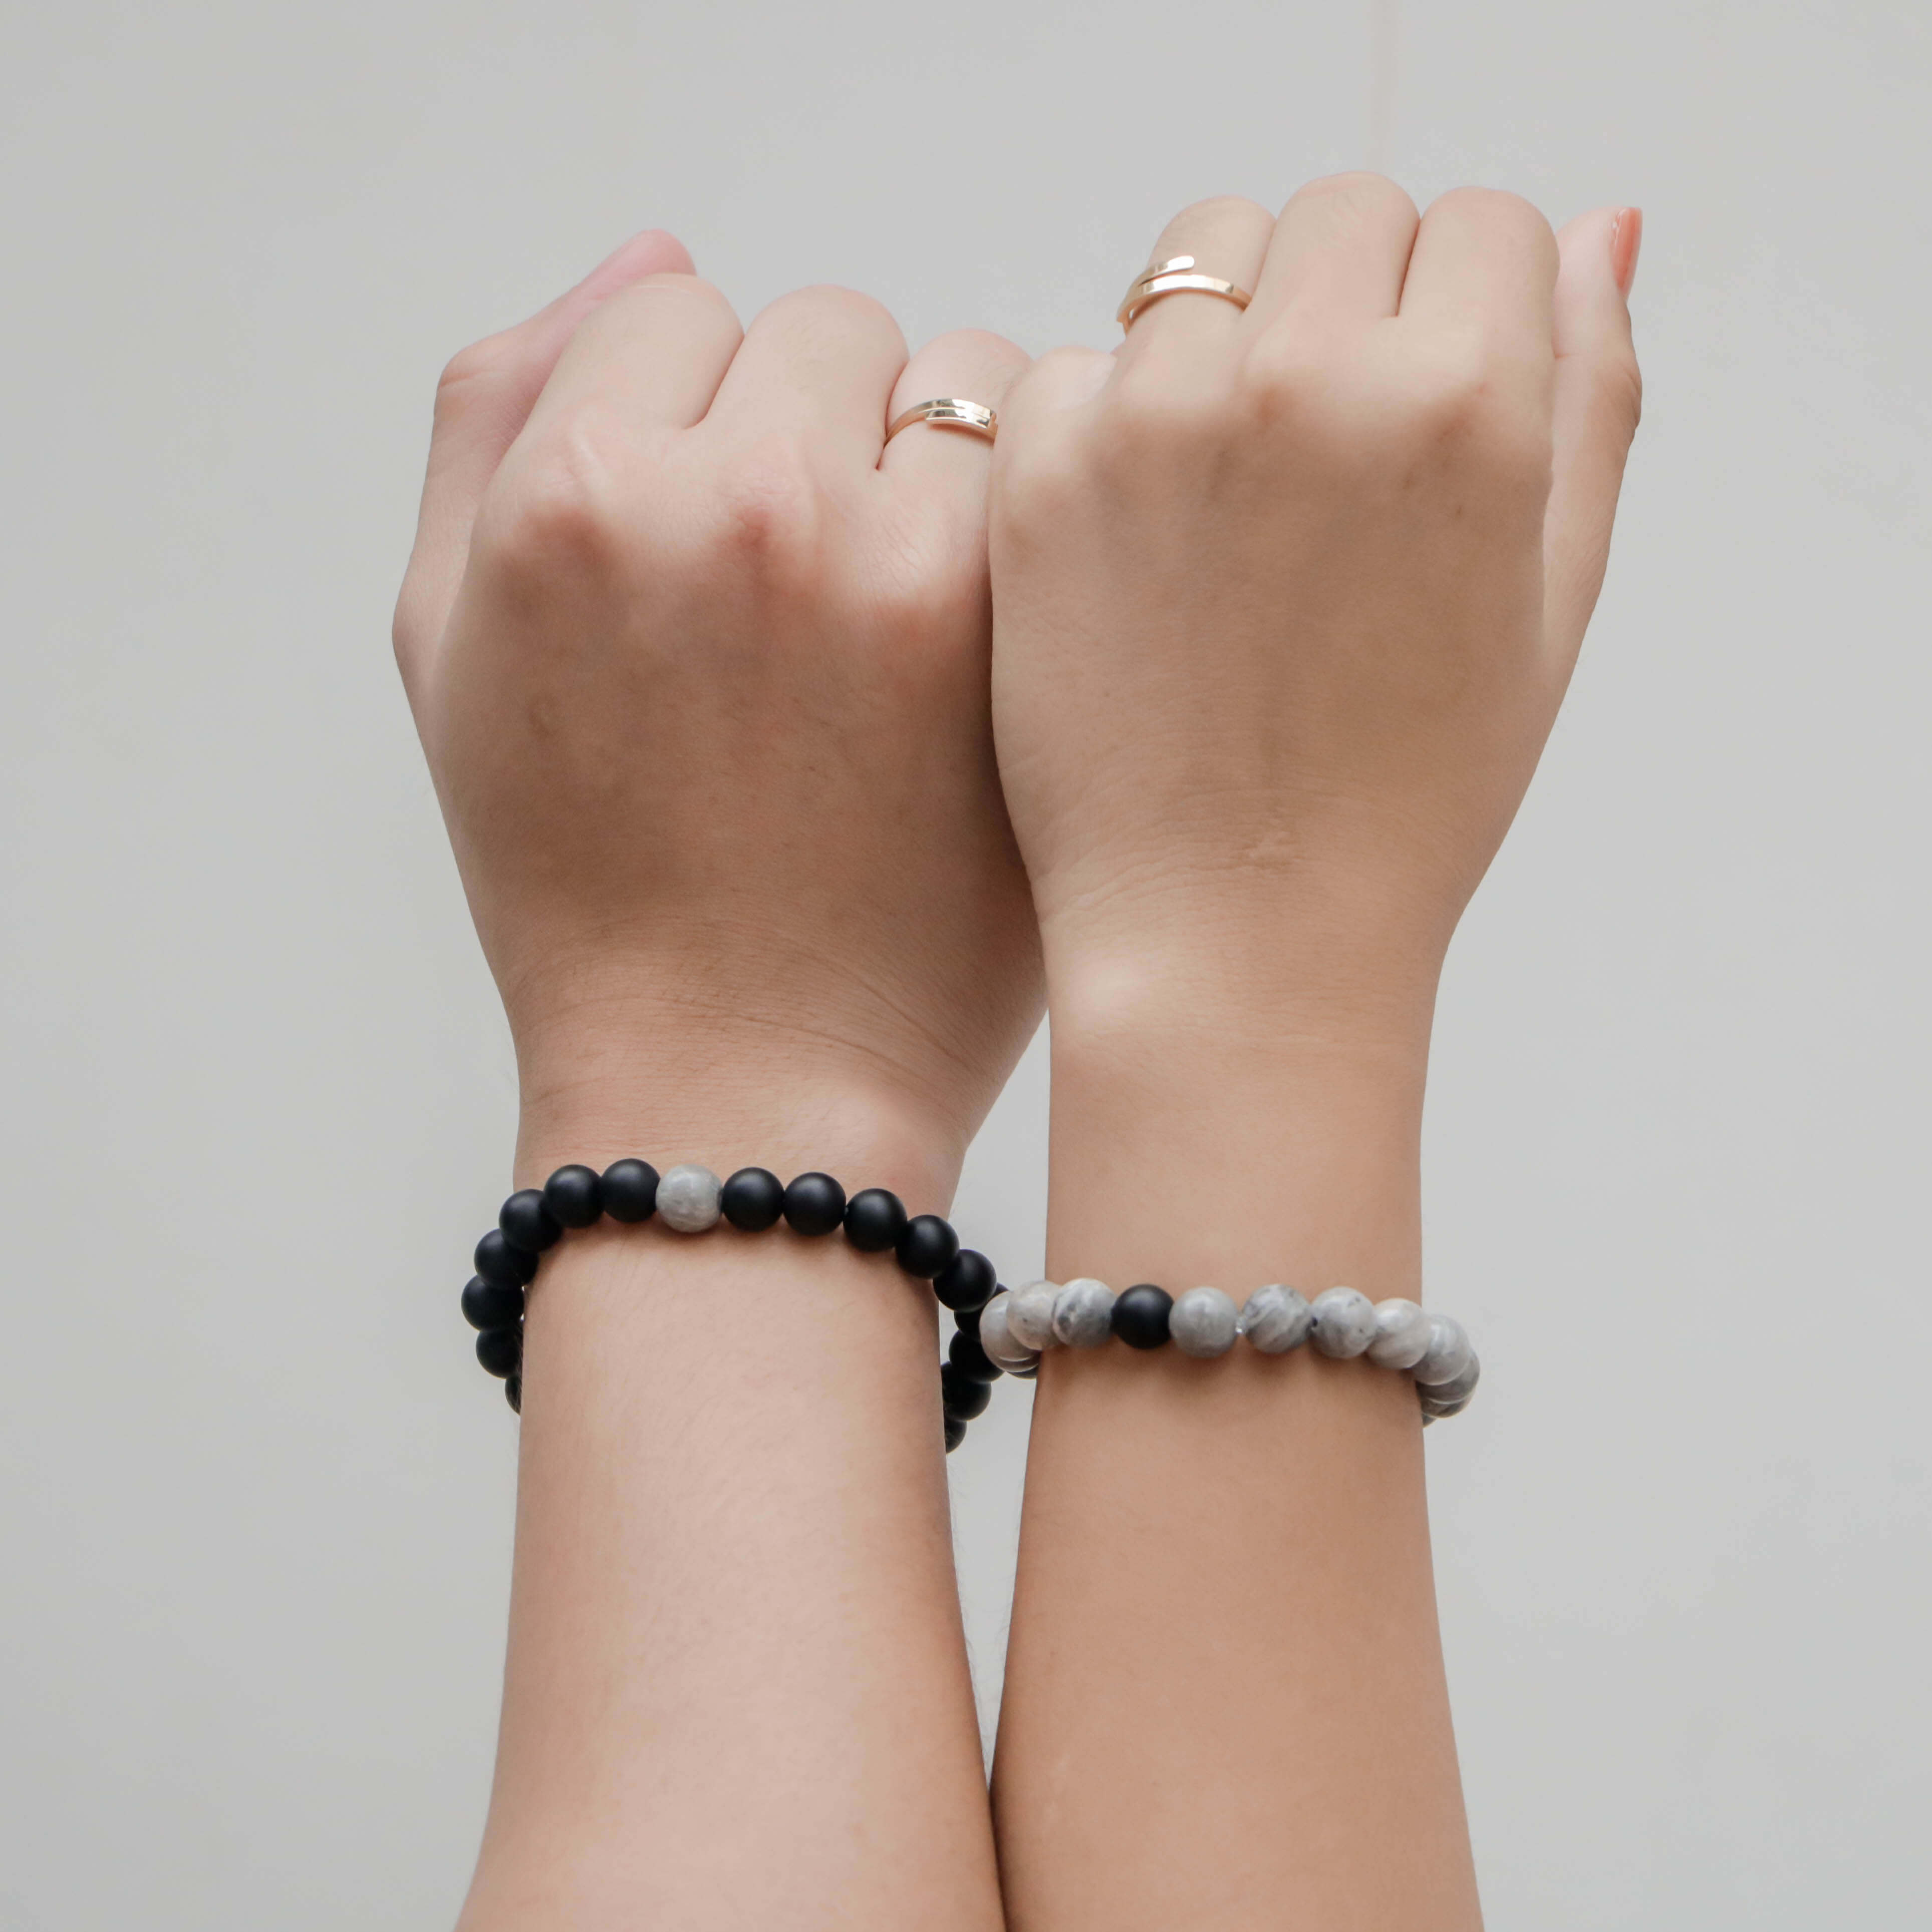 2pcs Distance Bracelets - Black And White Matching Pair - Long Distance -  For Friendships/relationships/couples - His/Hers - AliExpress